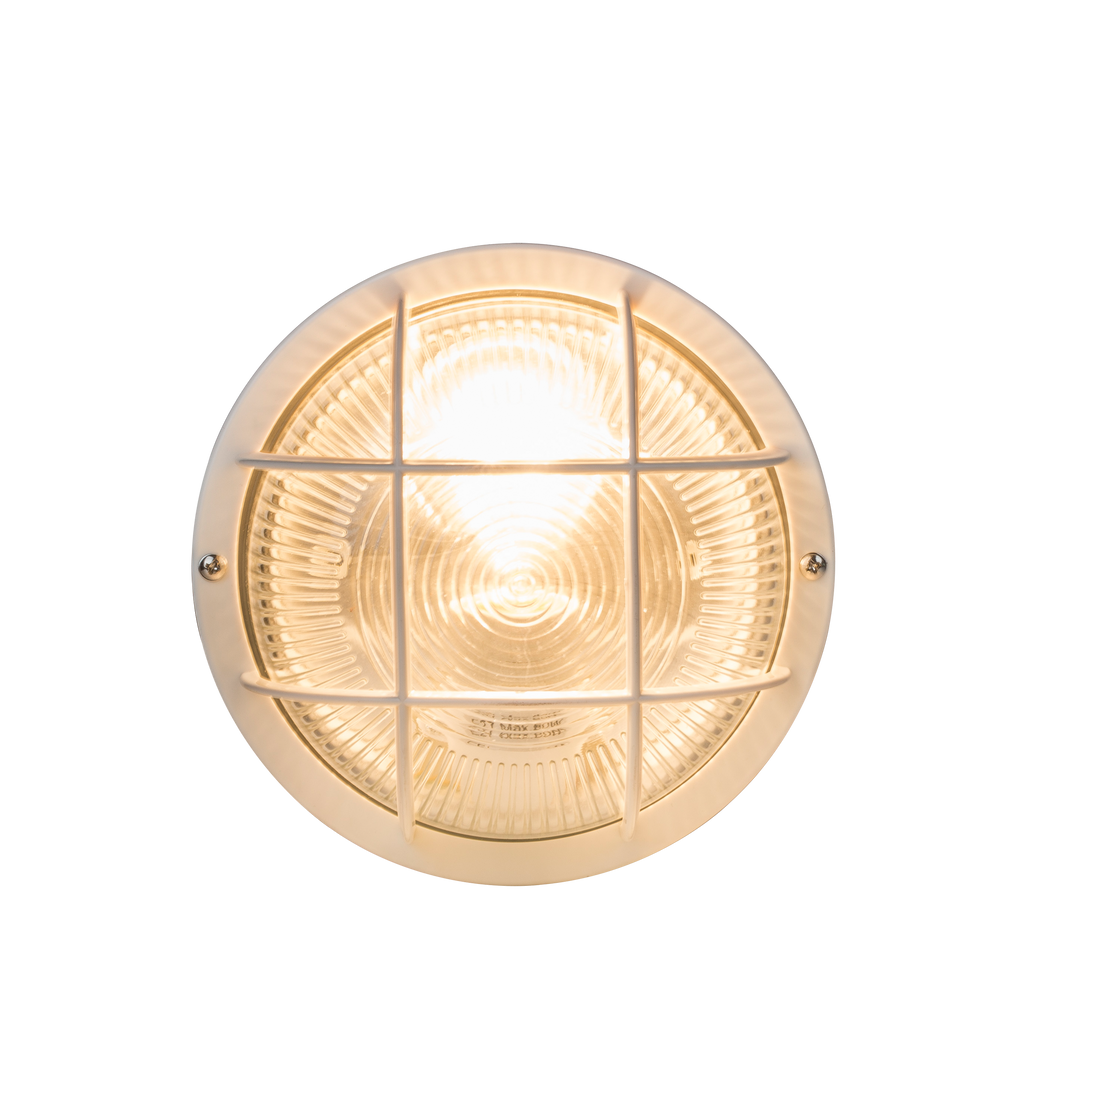 ROUND CEILING LIGHT WITH PLASTIC CAGE WHITE D18.5 E27=60W IP44